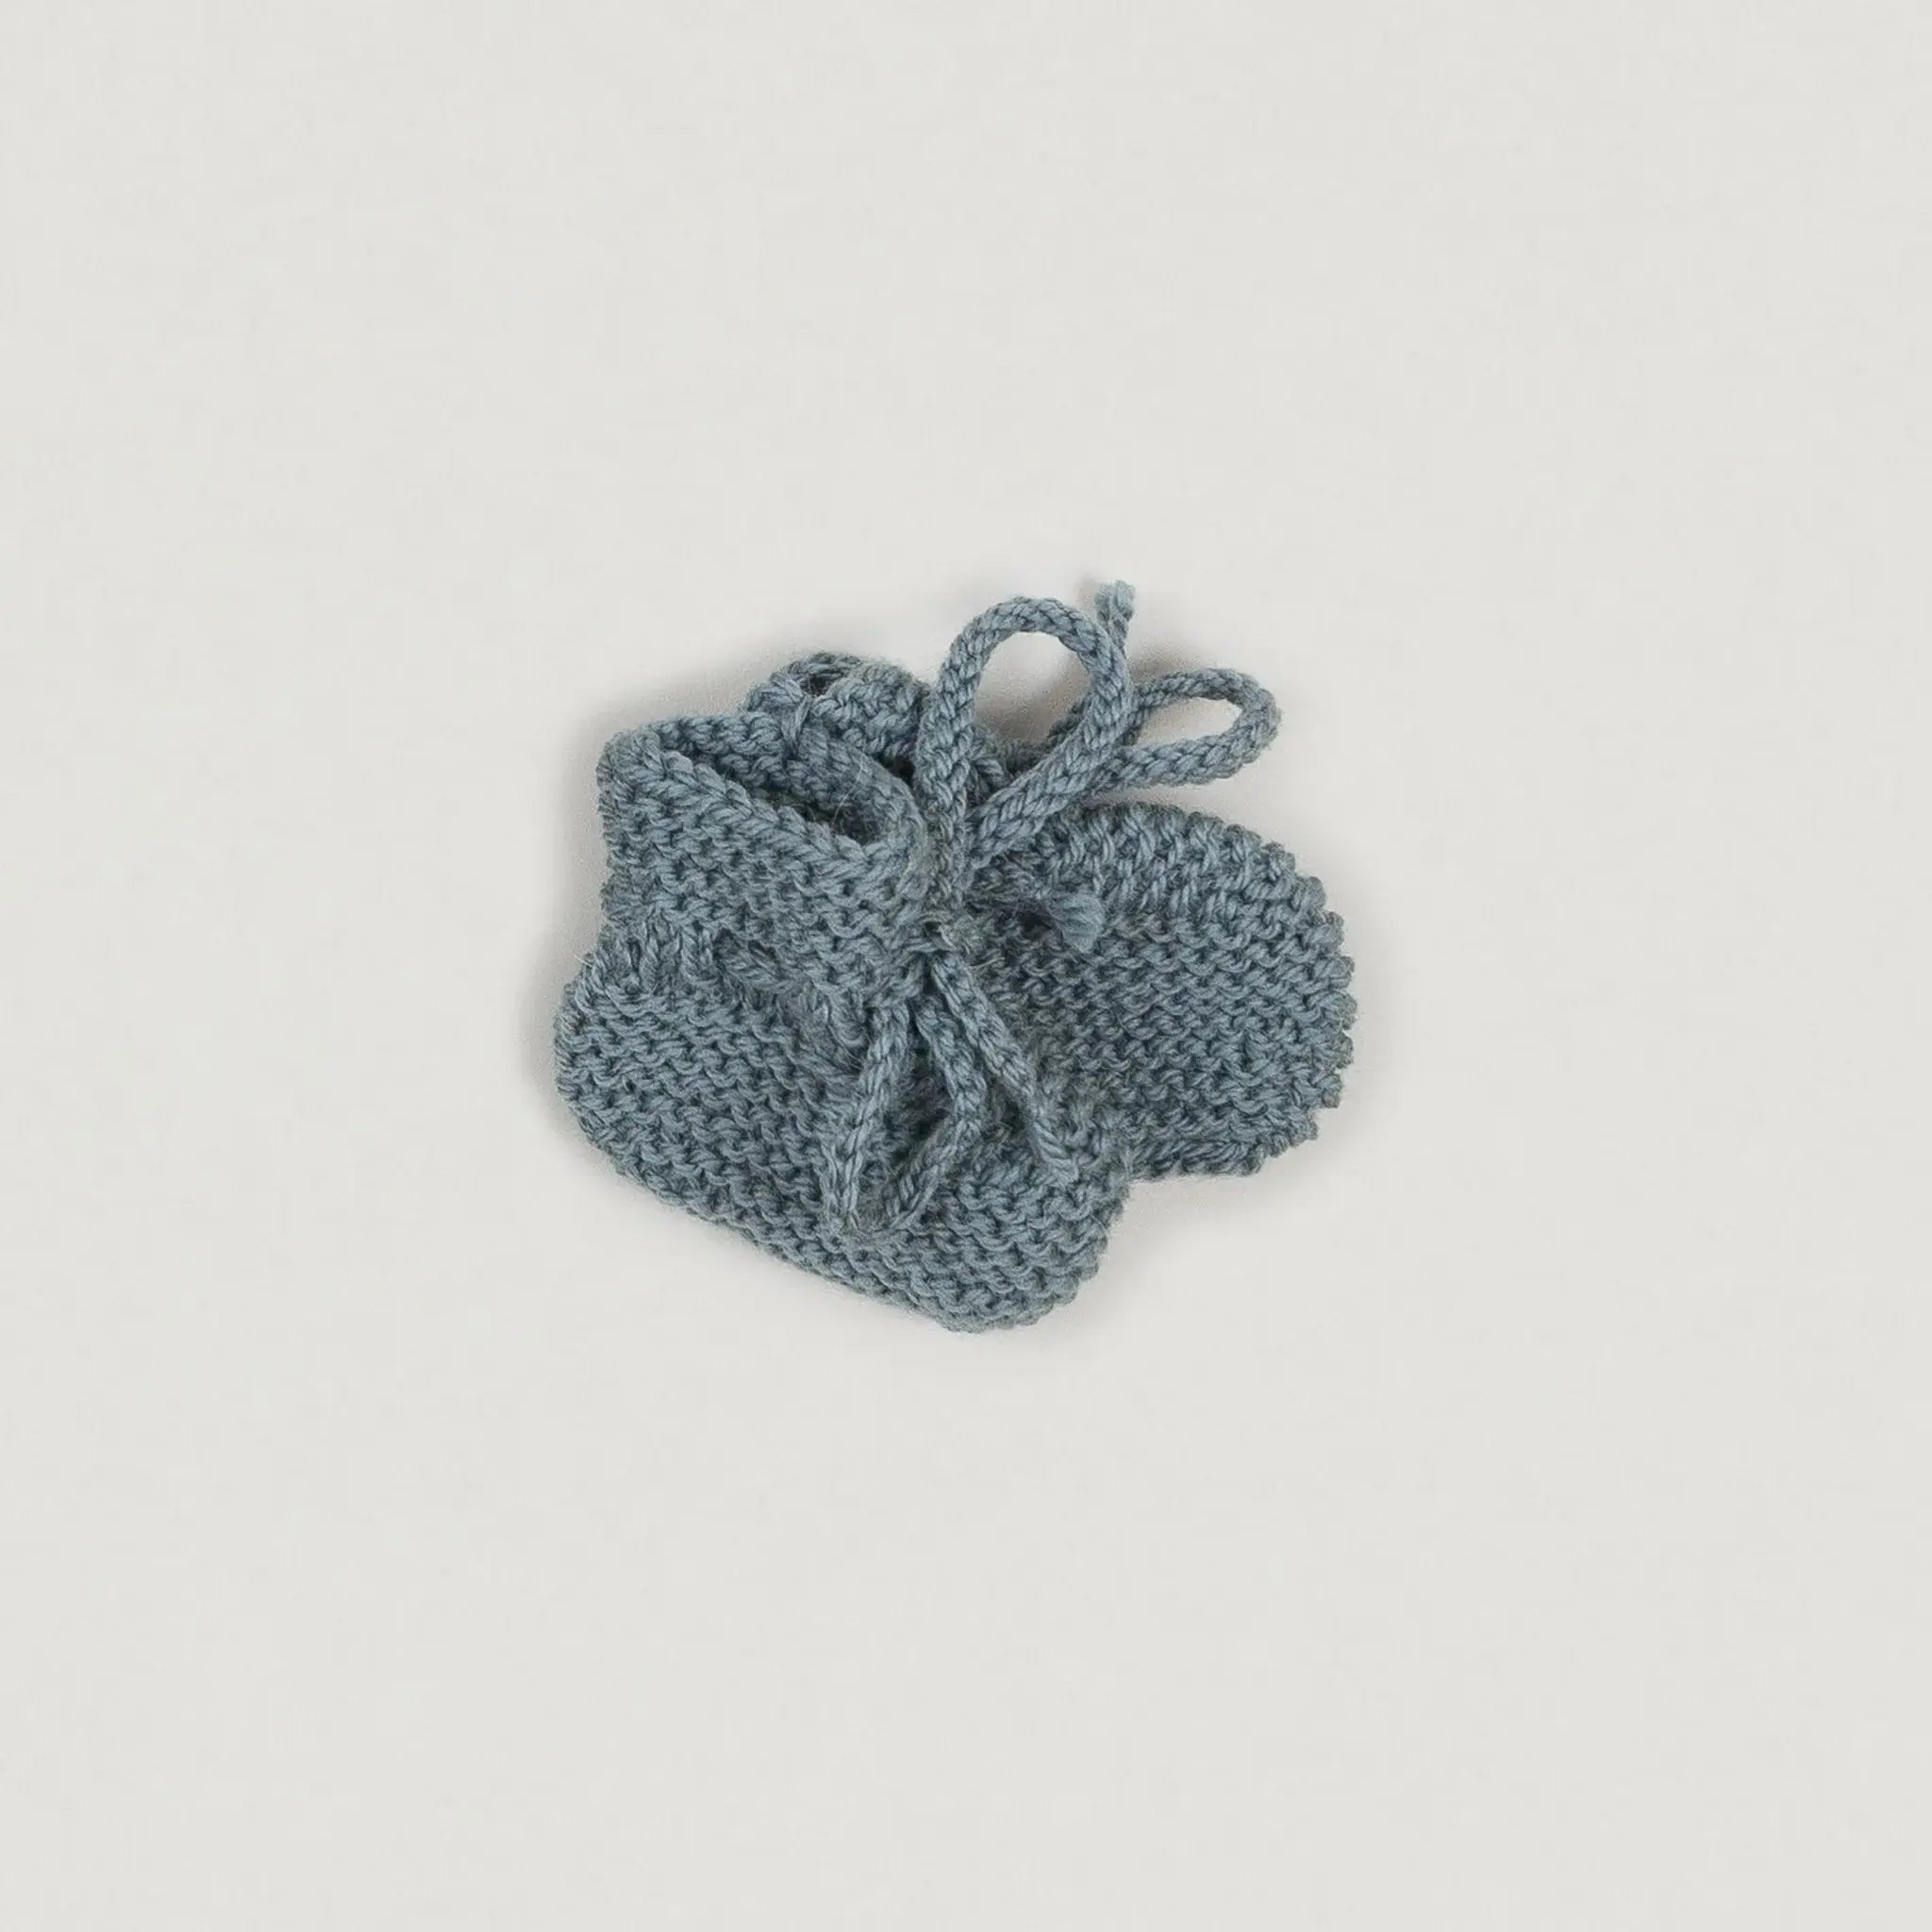 Hand-knitted baby shoes made of wool & alpaca